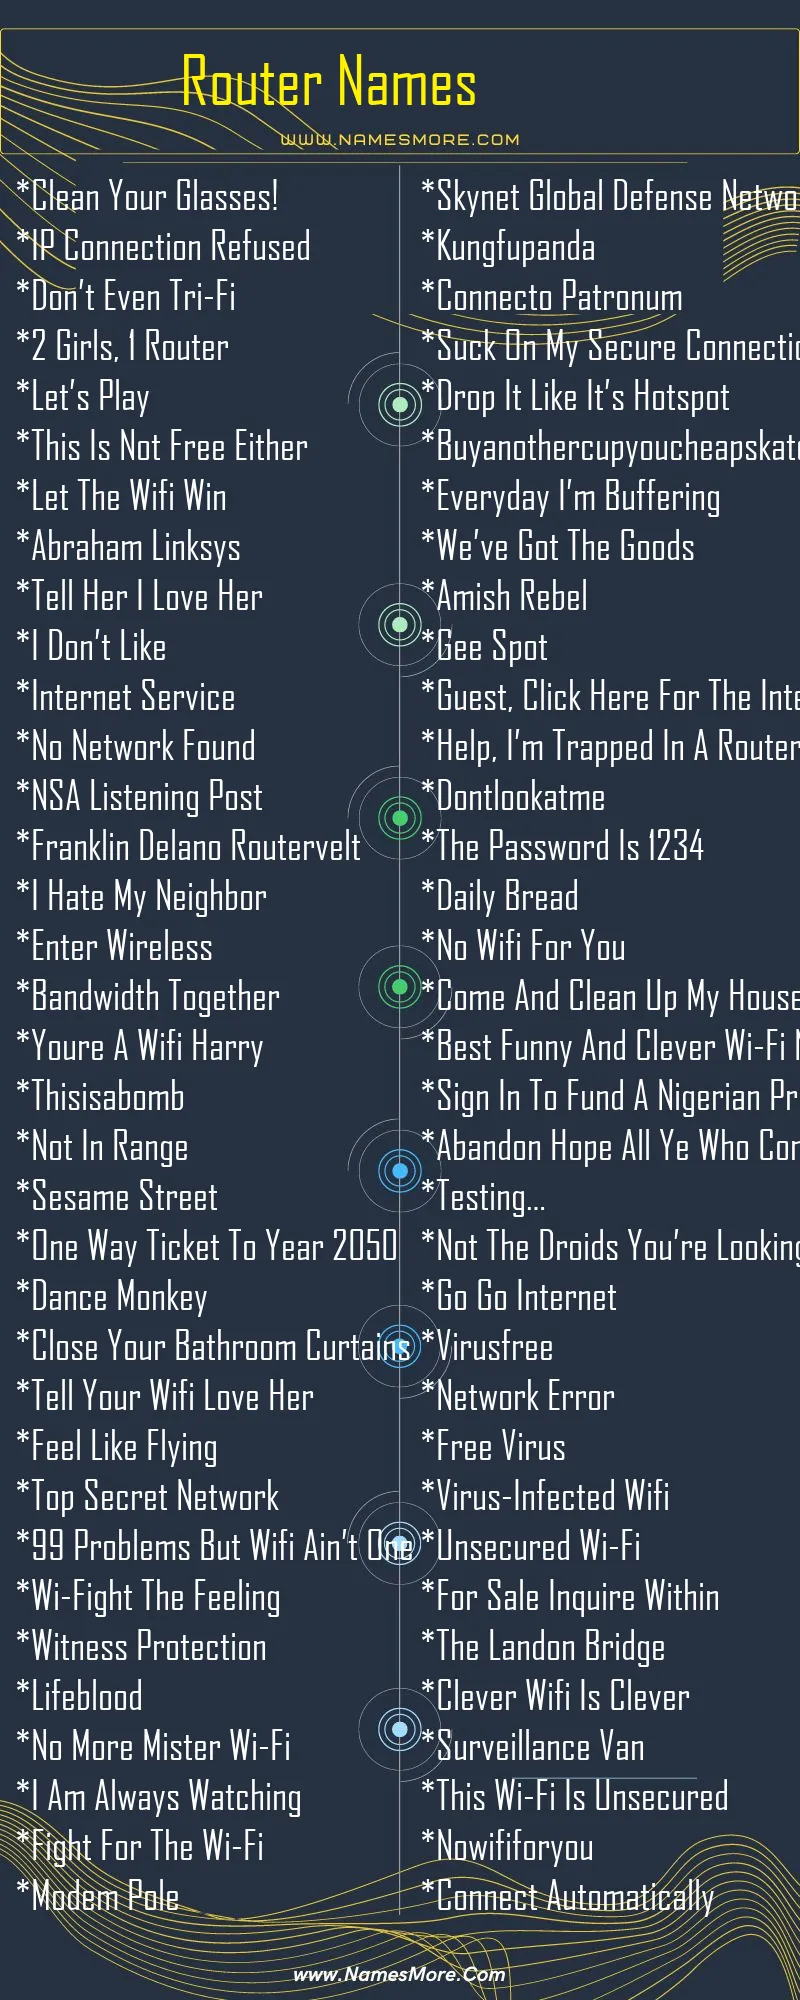 2600+ Router Names (Cool & Funny) List Infographic